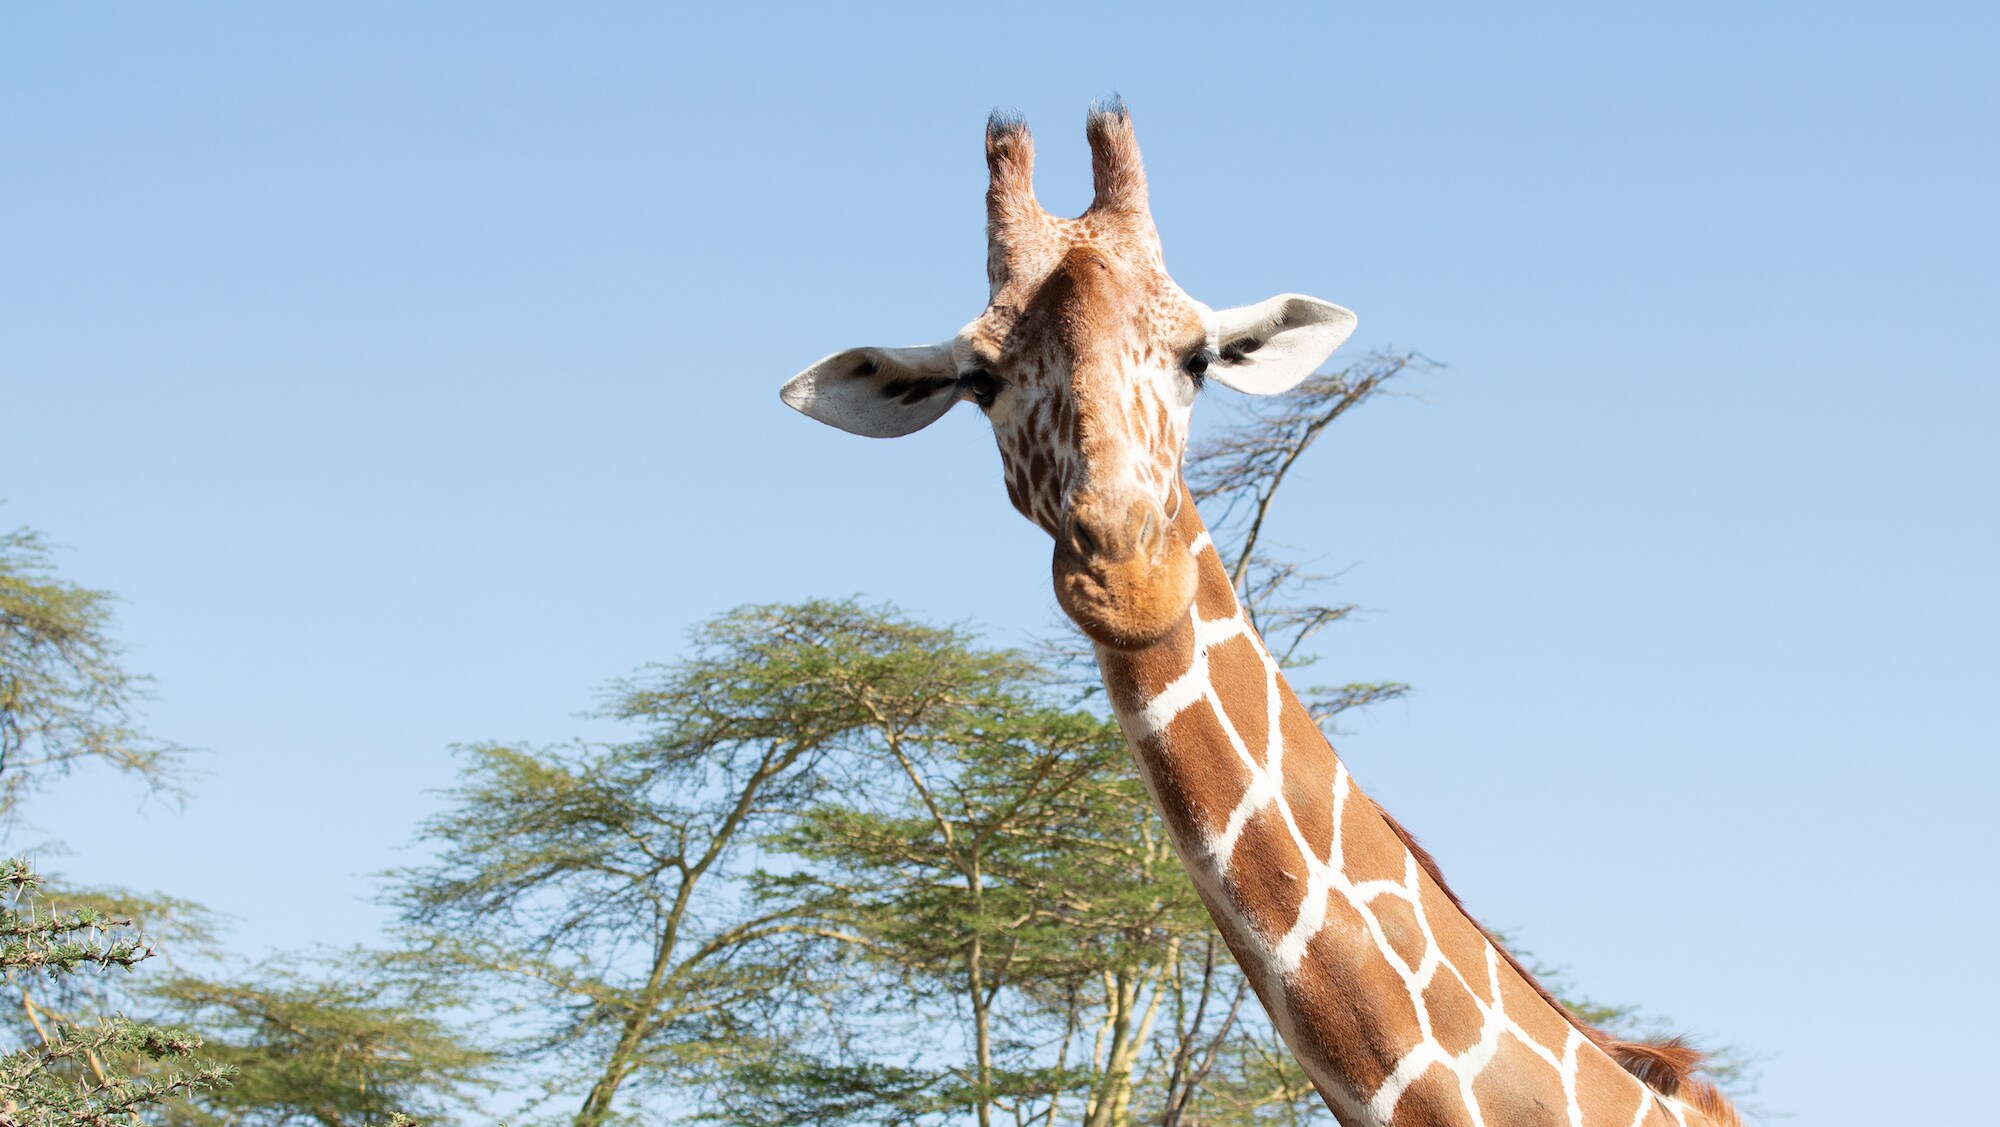 A Giraffe head and long neck from below in Ol Pejeta National Park.  (National Geographic for Disney+/Maurice Oniang’o)